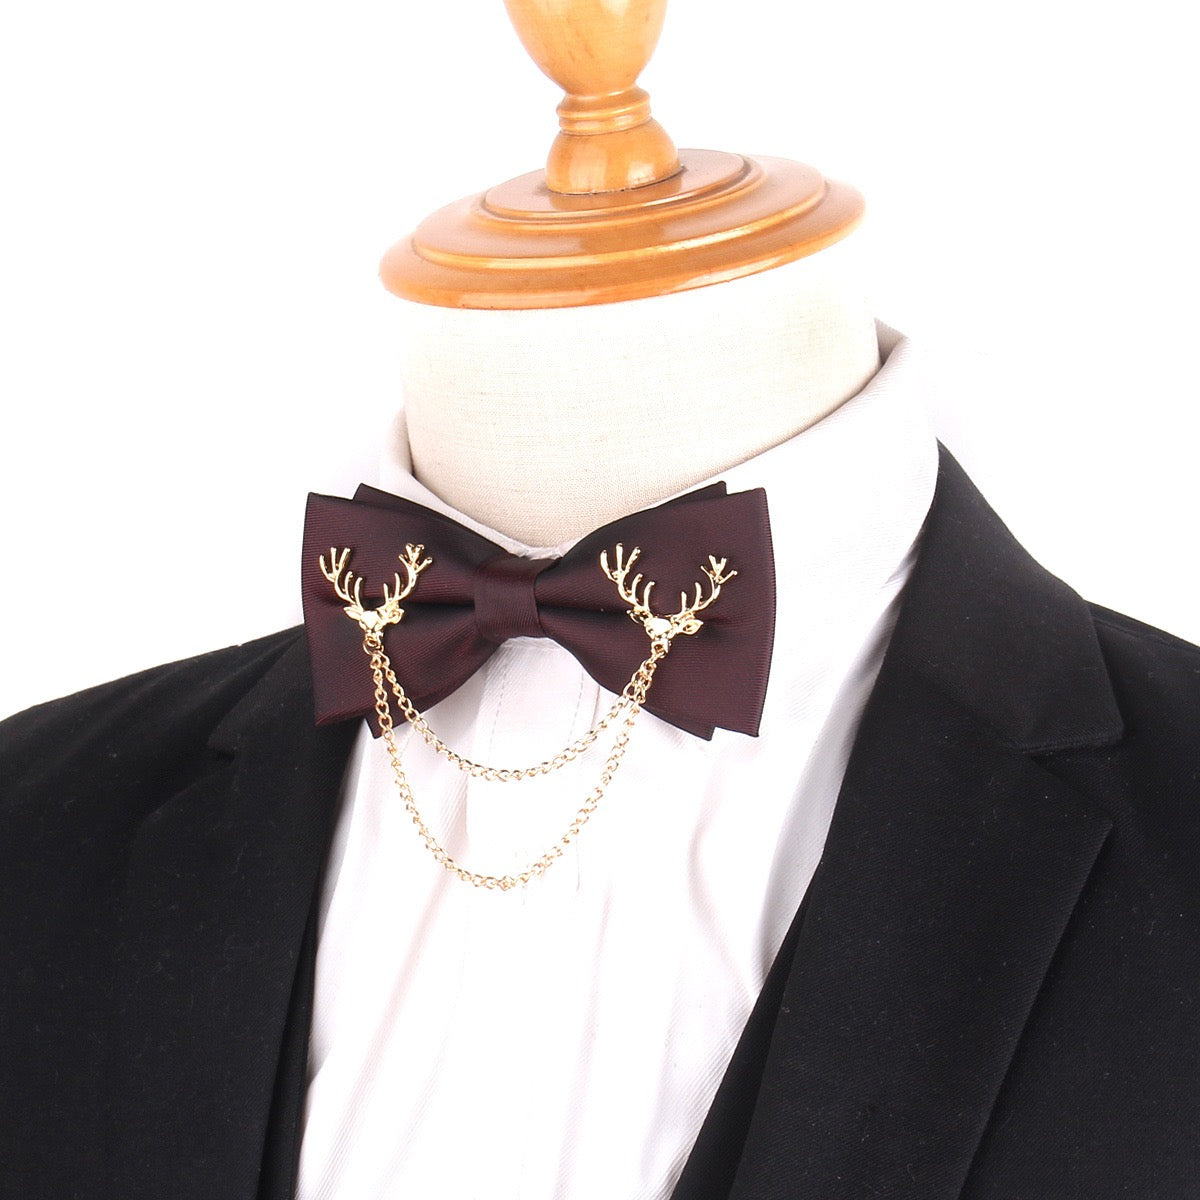 Handmade Men's Business and Formal Bow Tie